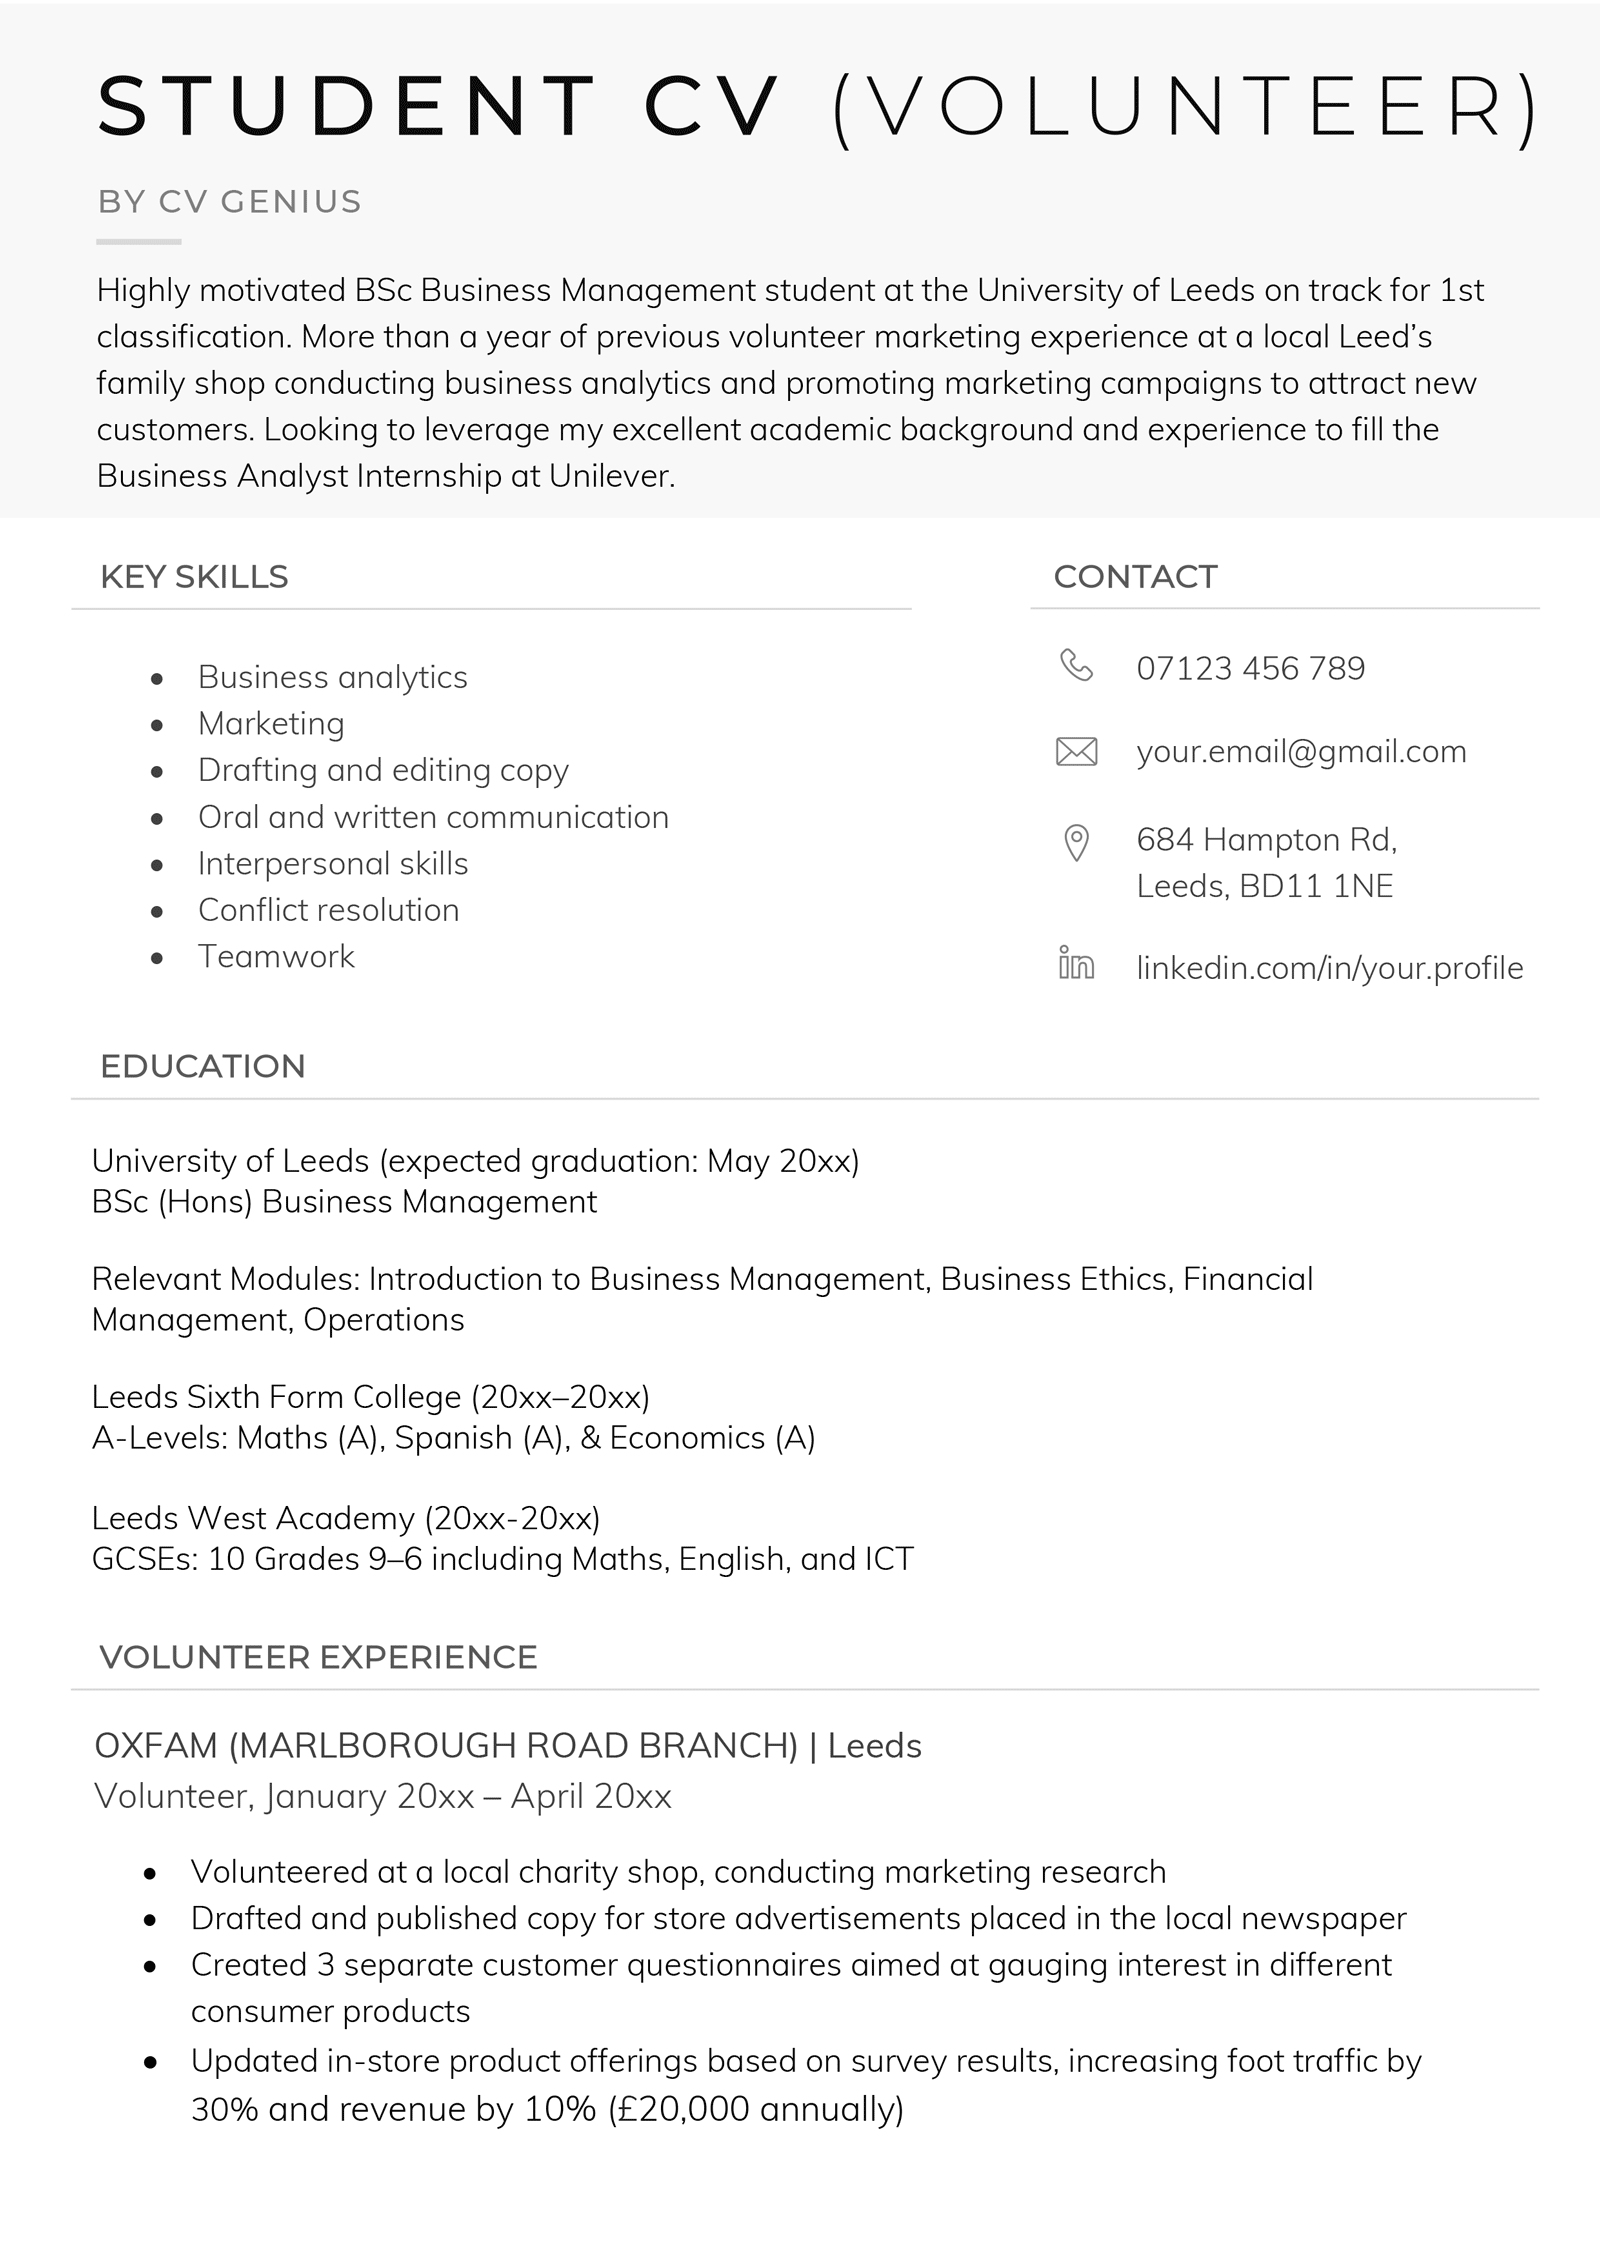 An example of a university student CV